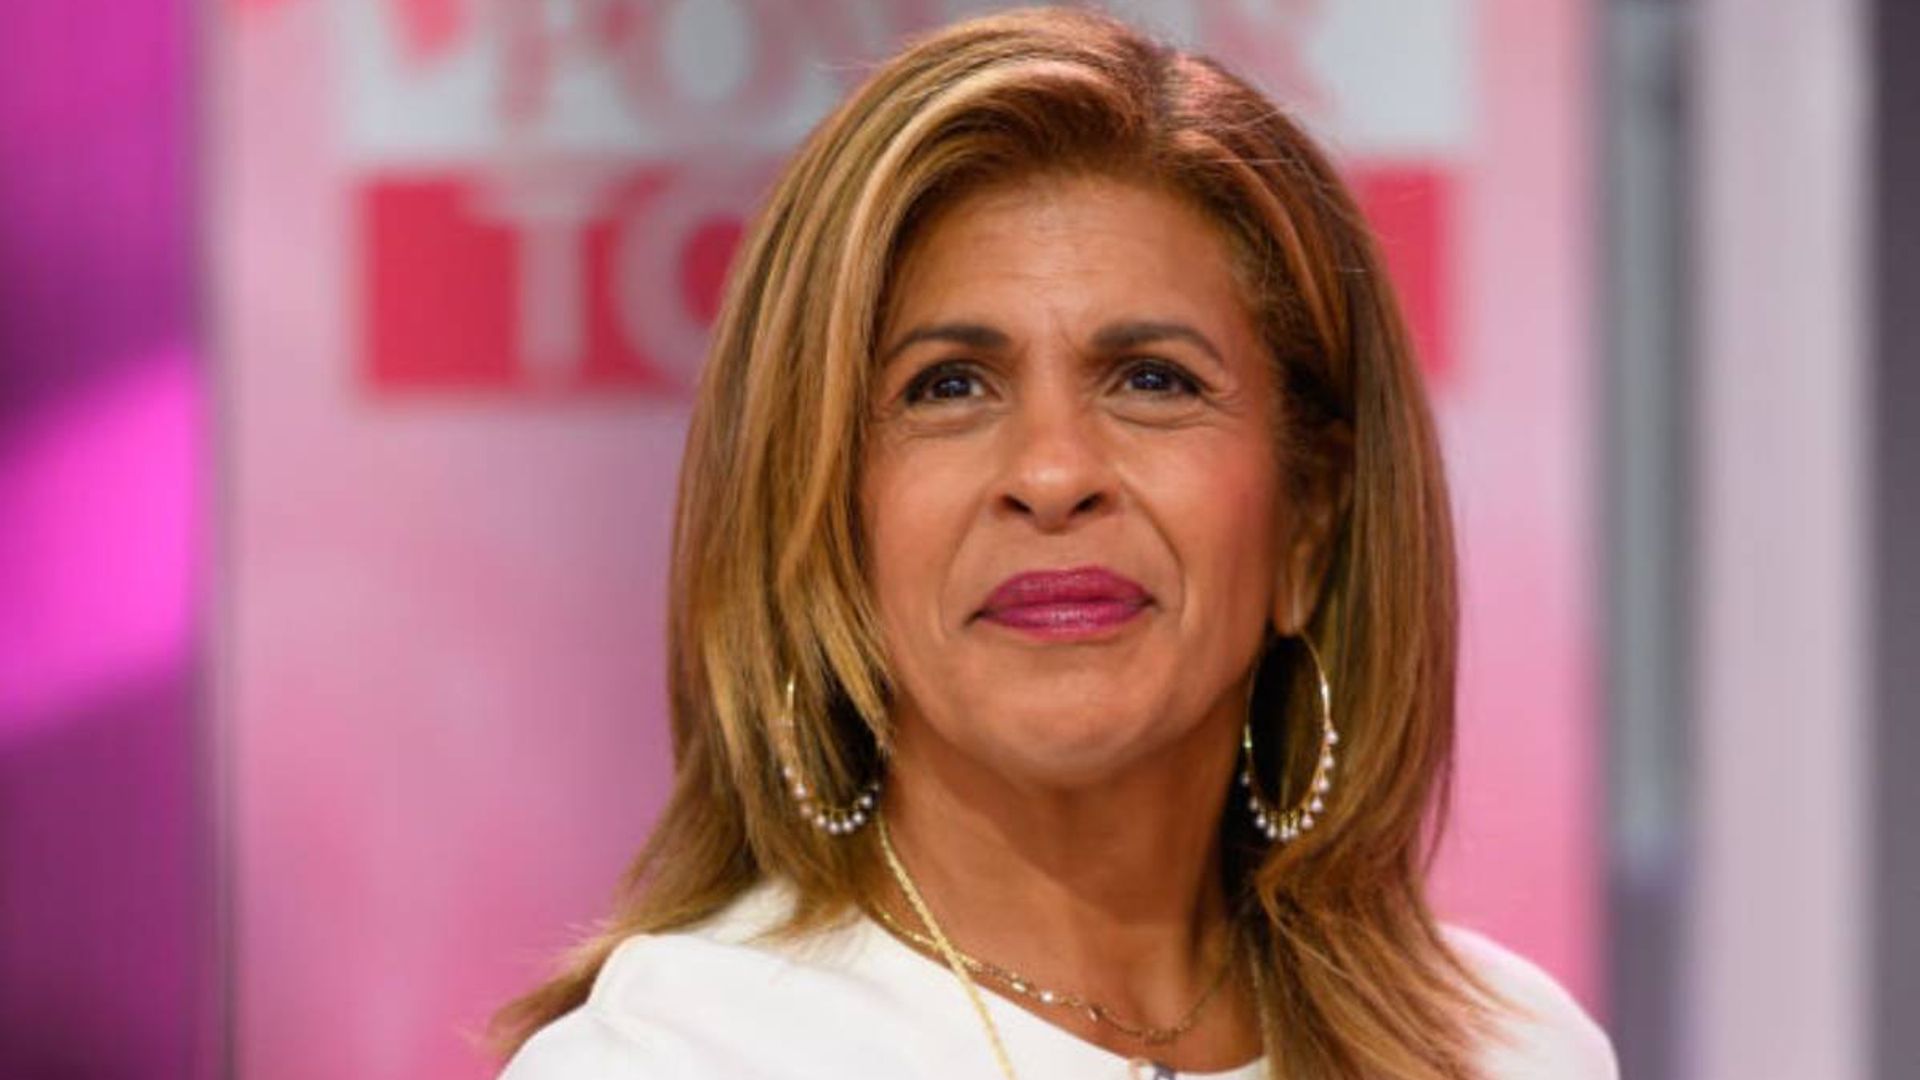 Hoda Kotb shares health update as fans and co-hosts send their support